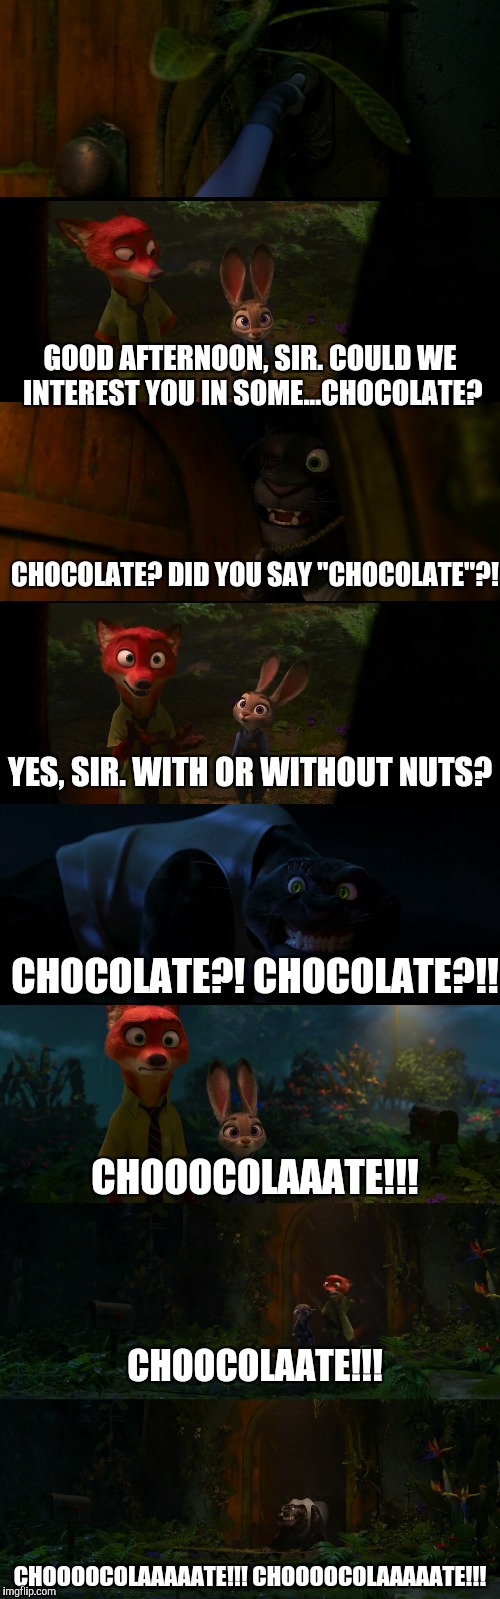 Did you say chocolate? Zootopia edition  | GOOD AFTERNOON, SIR. COULD WE INTEREST YOU IN SOME...CHOCOLATE? CHOCOLATE? DID YOU SAY "CHOCOLATE"?! YES, SIR. WITH OR WITHOUT NUTS? CHOCOLATE?! CHOCOLATE?!! CHOOOCOLAAATE!!! CHOOCOLAATE!!! CHOOOOCOLAAAAATE!!! CHOOOOCOLAAAAATE!!! | image tagged in zootopia,parody,funny,memes,nick wilde,judy hopps | made w/ Imgflip meme maker